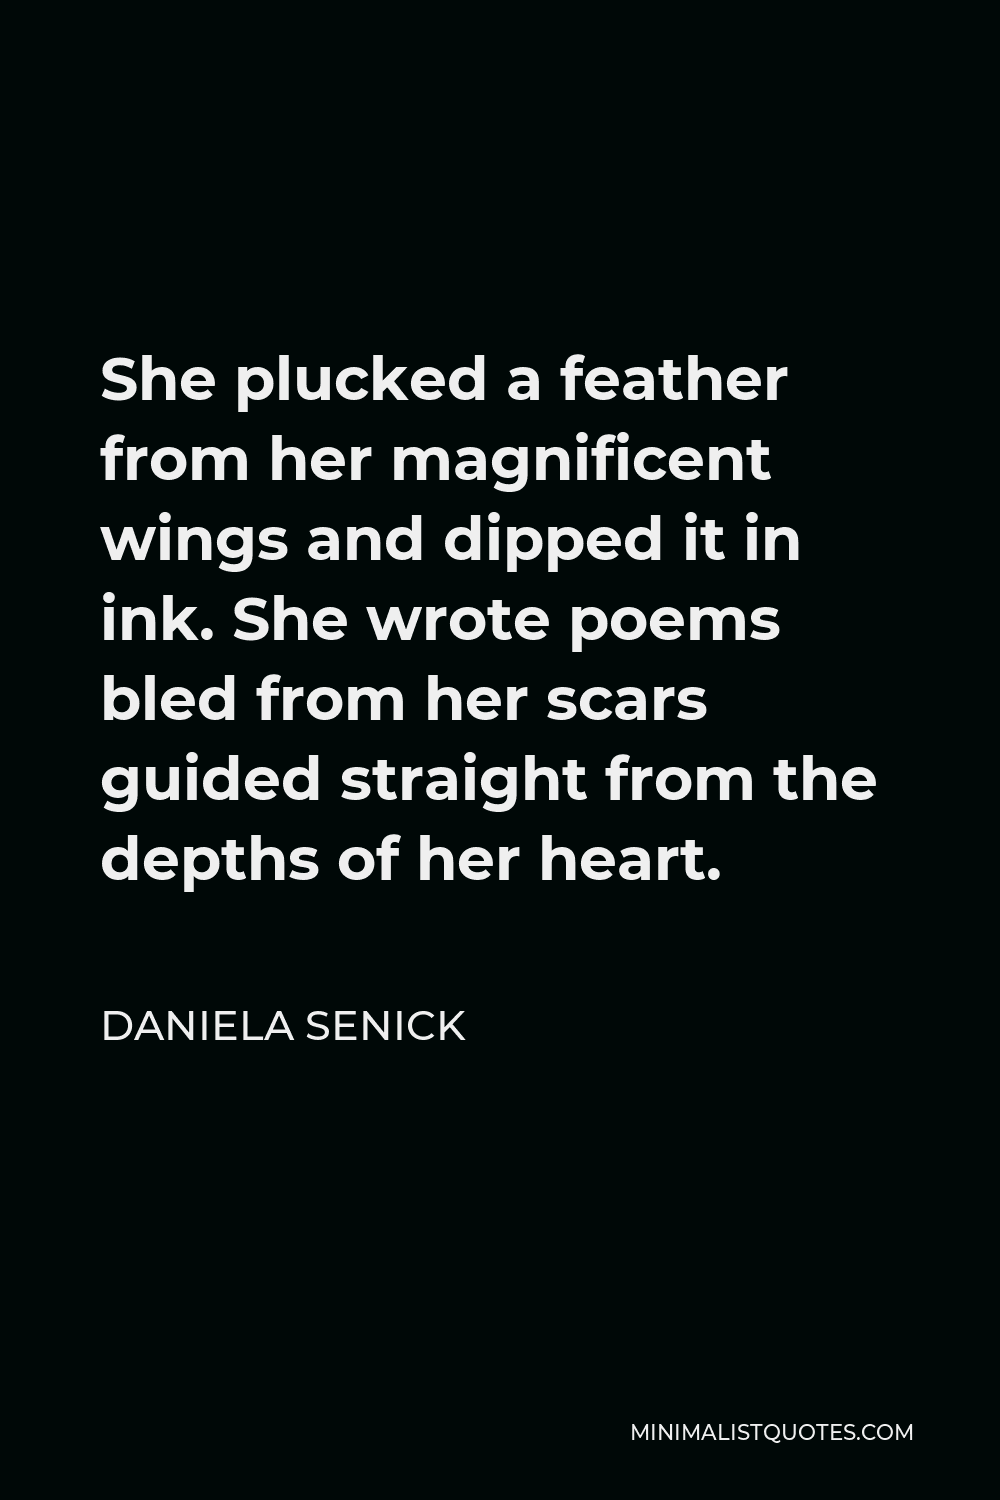 Daniela Senick Quote - She plucked a feather from her magnificent wings and dipped it in ink. She wrote poems bled from her scars guided straight from the depths of her heart.